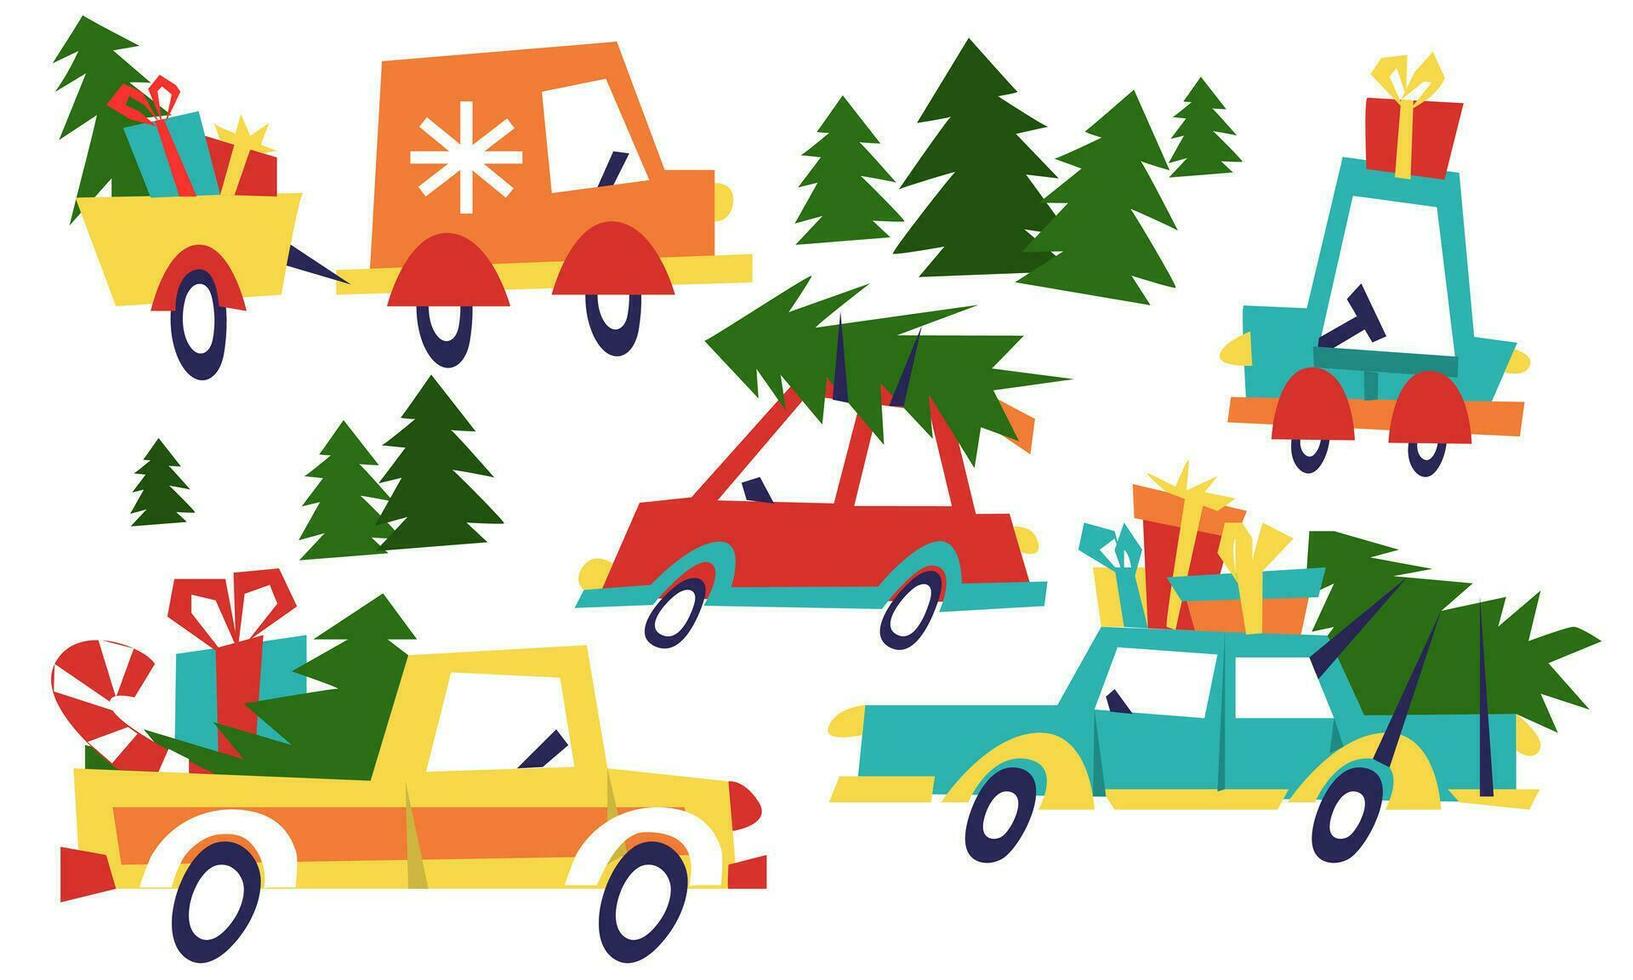 A set of geometric cars with Christmas trees, gifts, candies for celebrating Christmas and New Year. Isolated children's vector illustration for a holiday on a white. Collection with Christmas trees